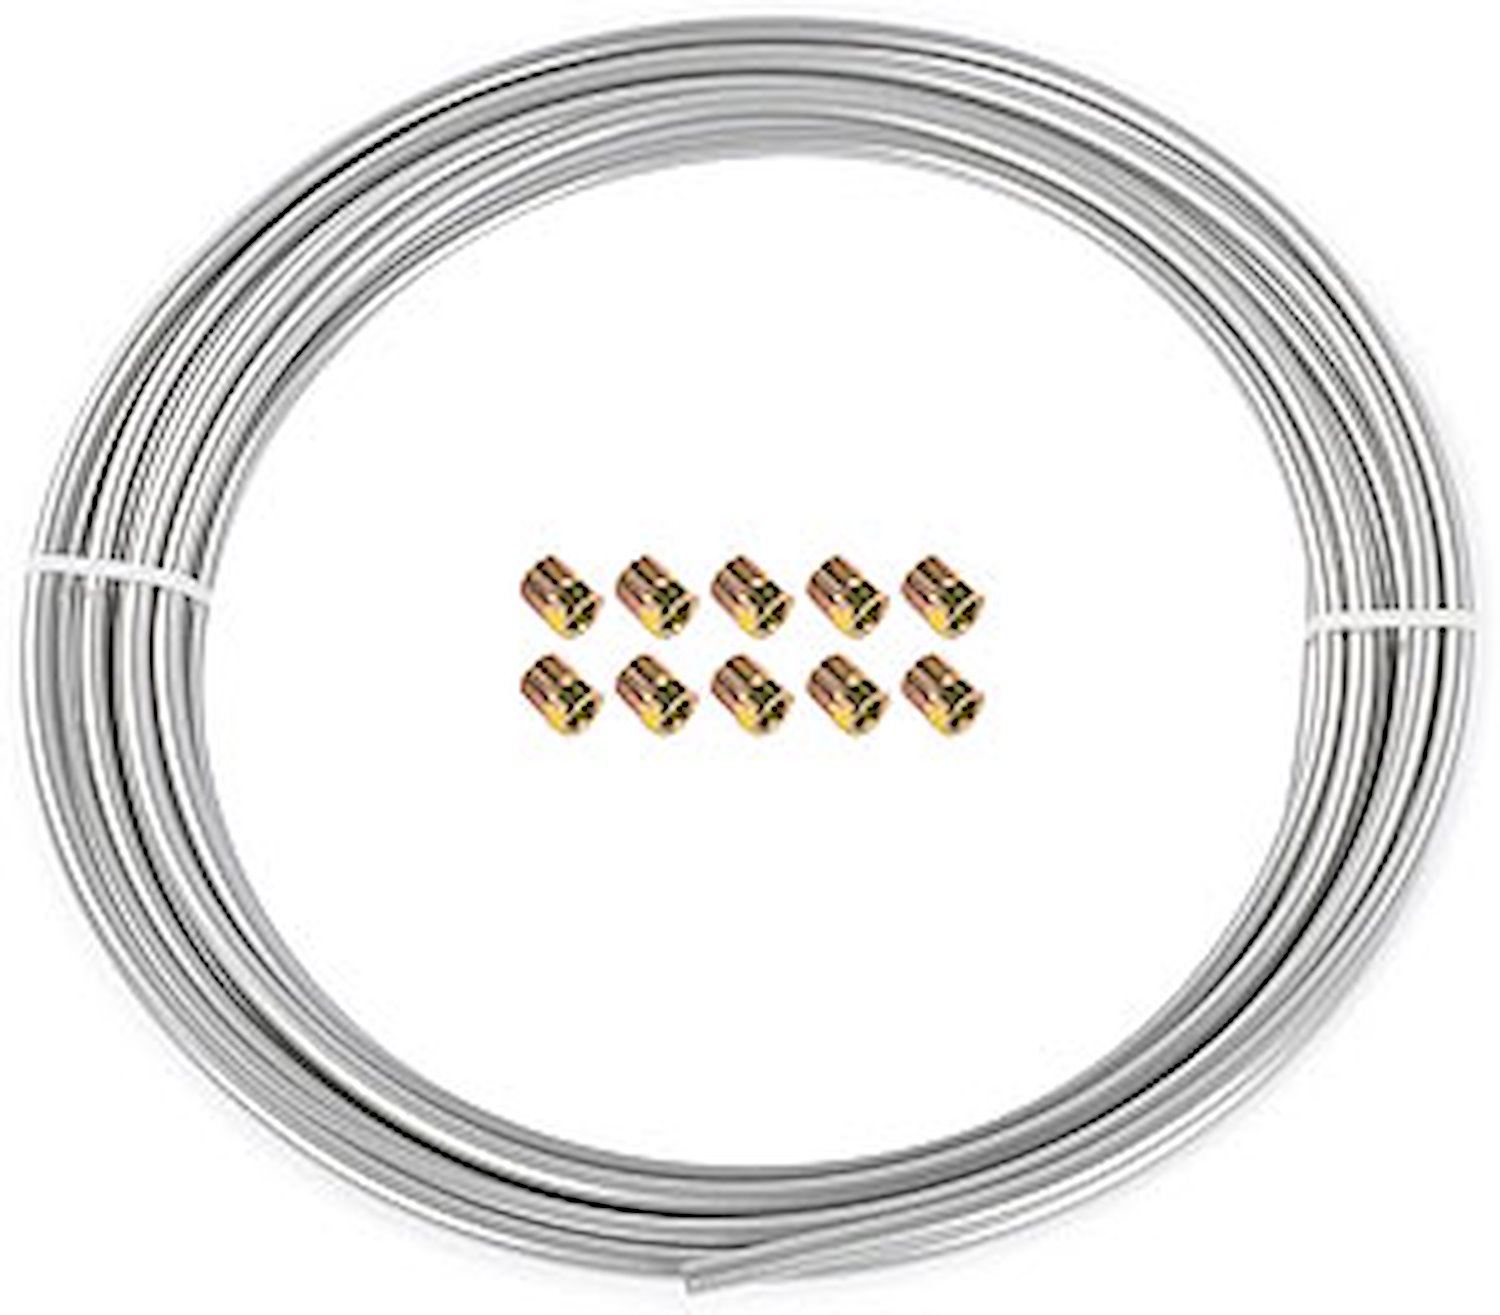 Silver Fuel and Transmission Cooler Tubing Kit 5/16 in. Diameter x 25 ft.